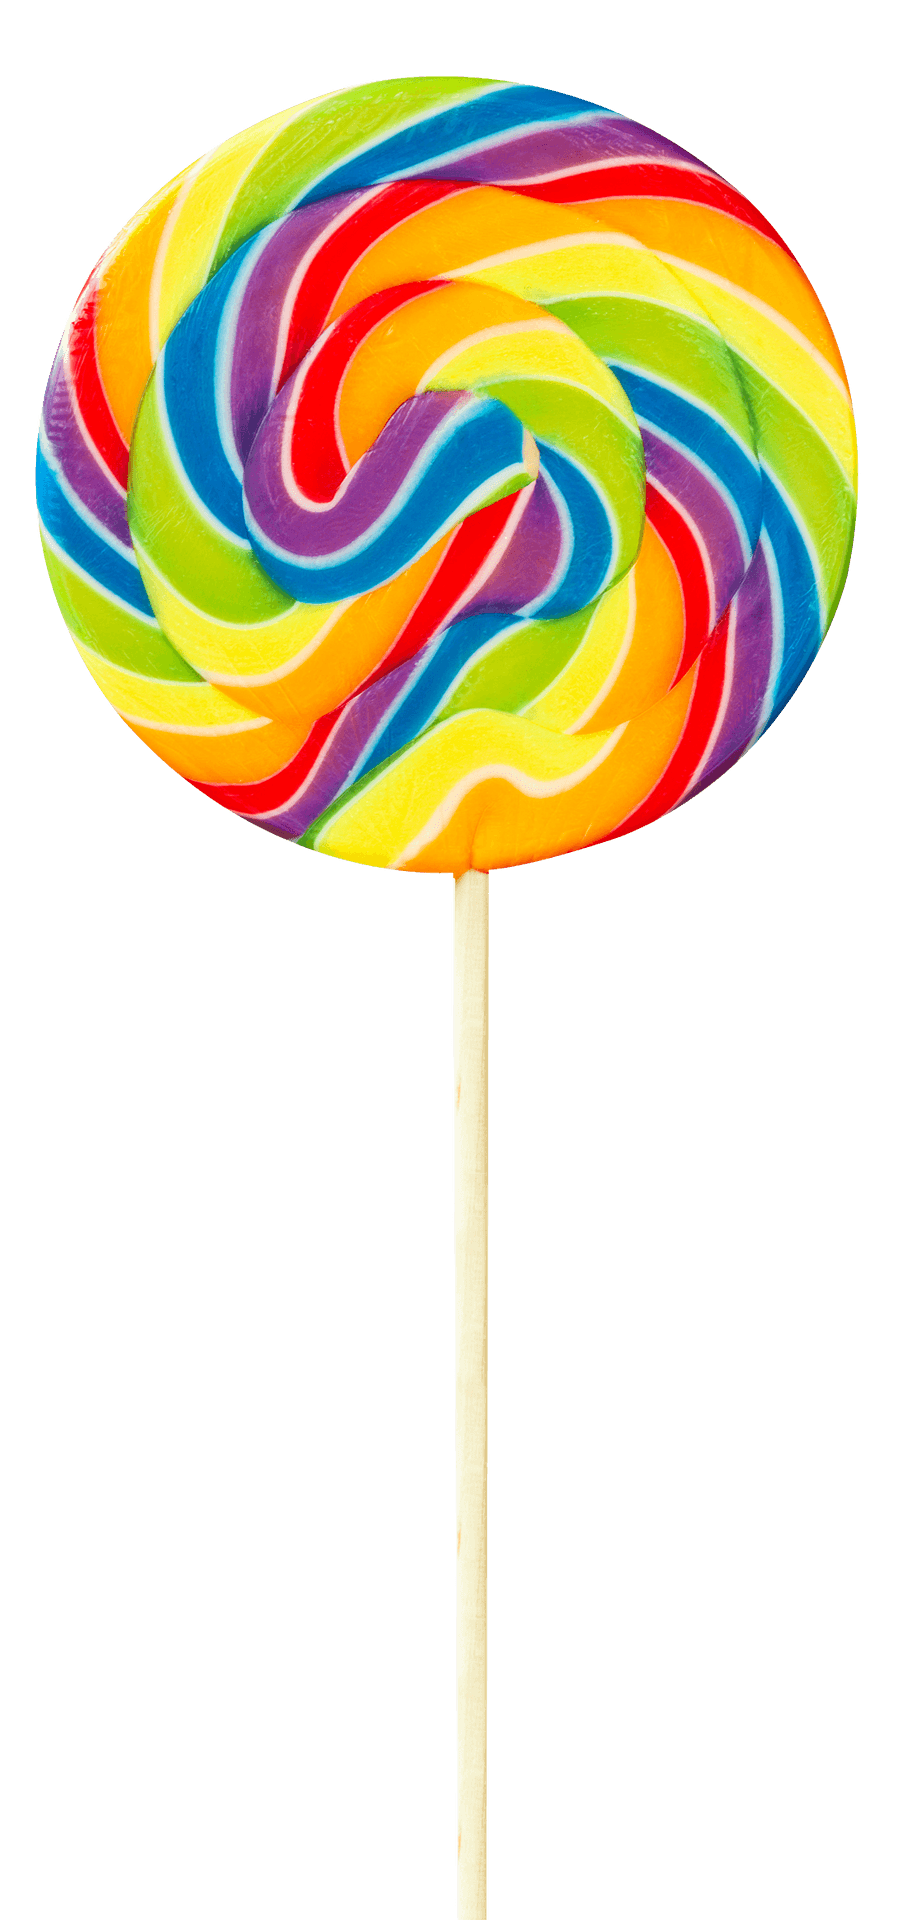 Colorful Swirl Lollipop PNG image